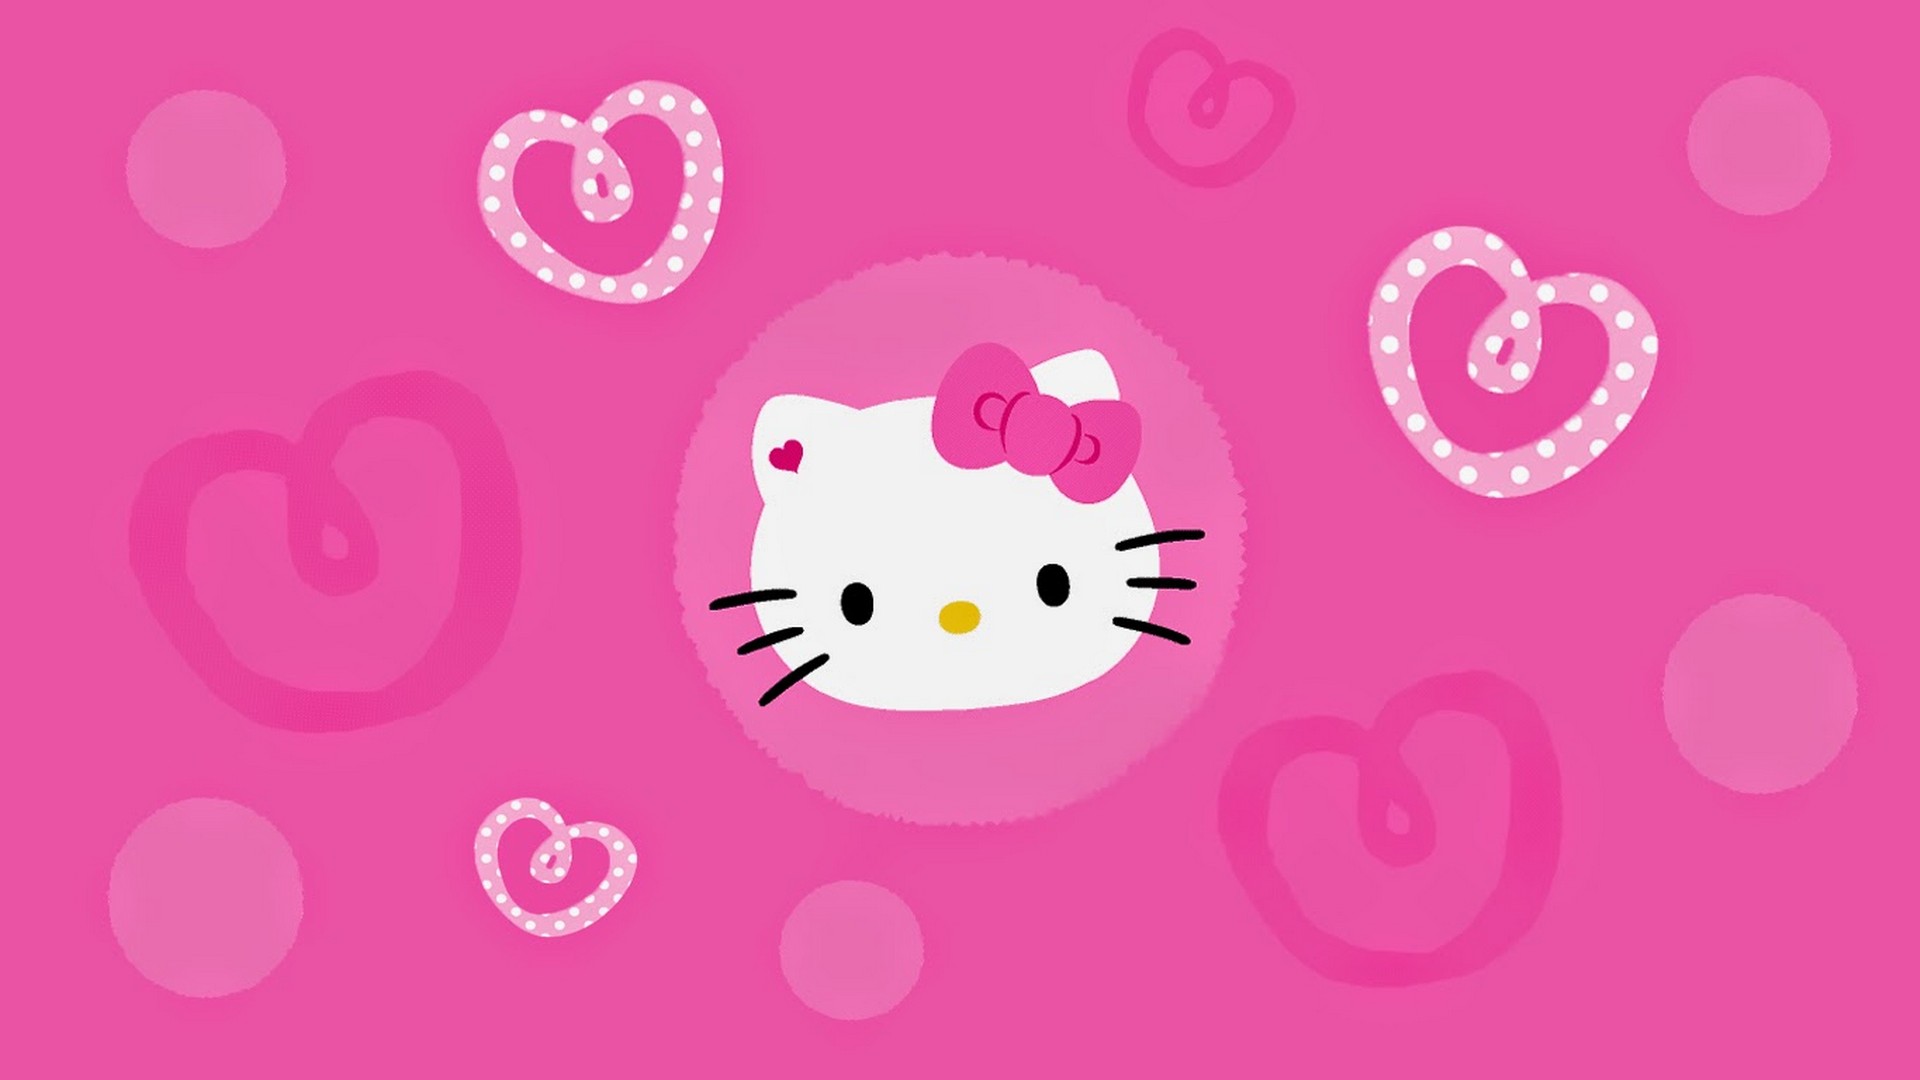 Hello Kitty Pictures Desktop Wallpaper With Image Resolution - Hello Kitty Panda Wallpaper Hd - HD Wallpaper 